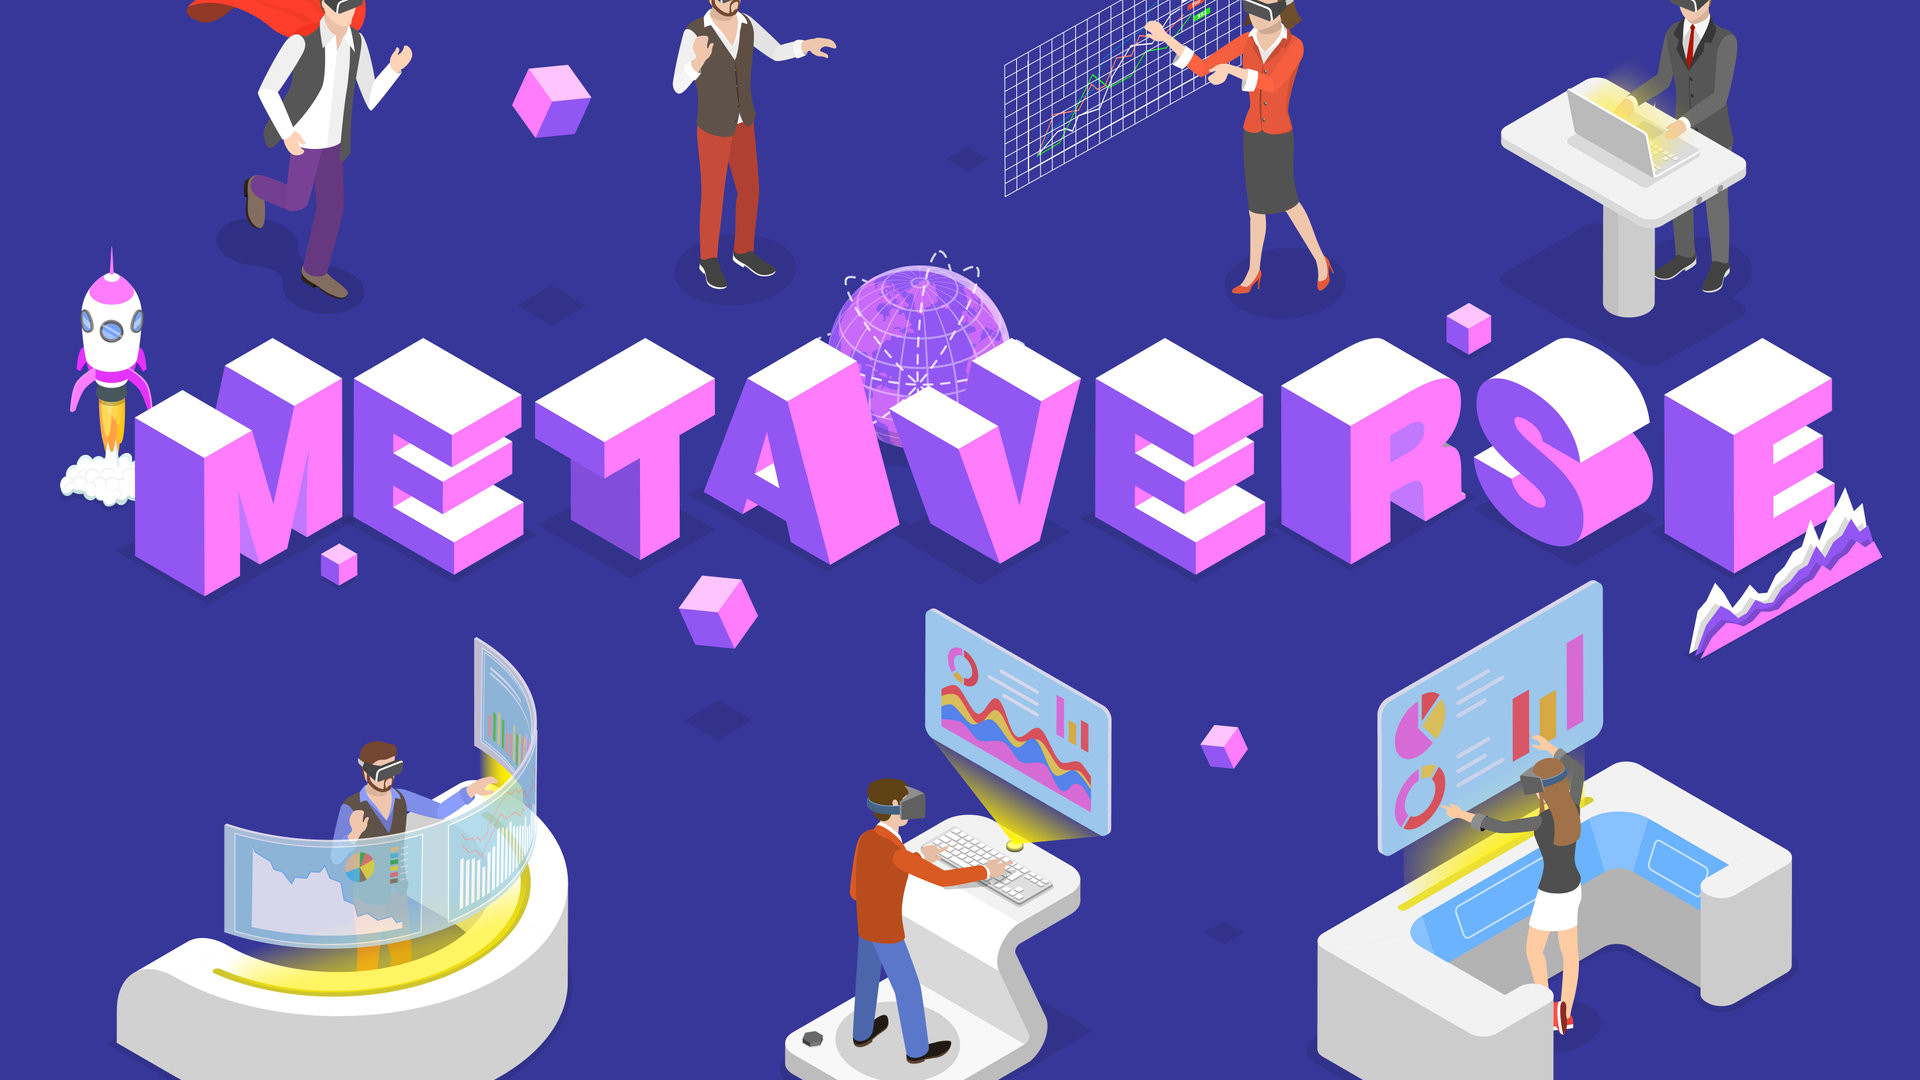 3D Isometric Flat Vector Conceptual Illustration of Metaverse, Limitless Virtual Reality Technology